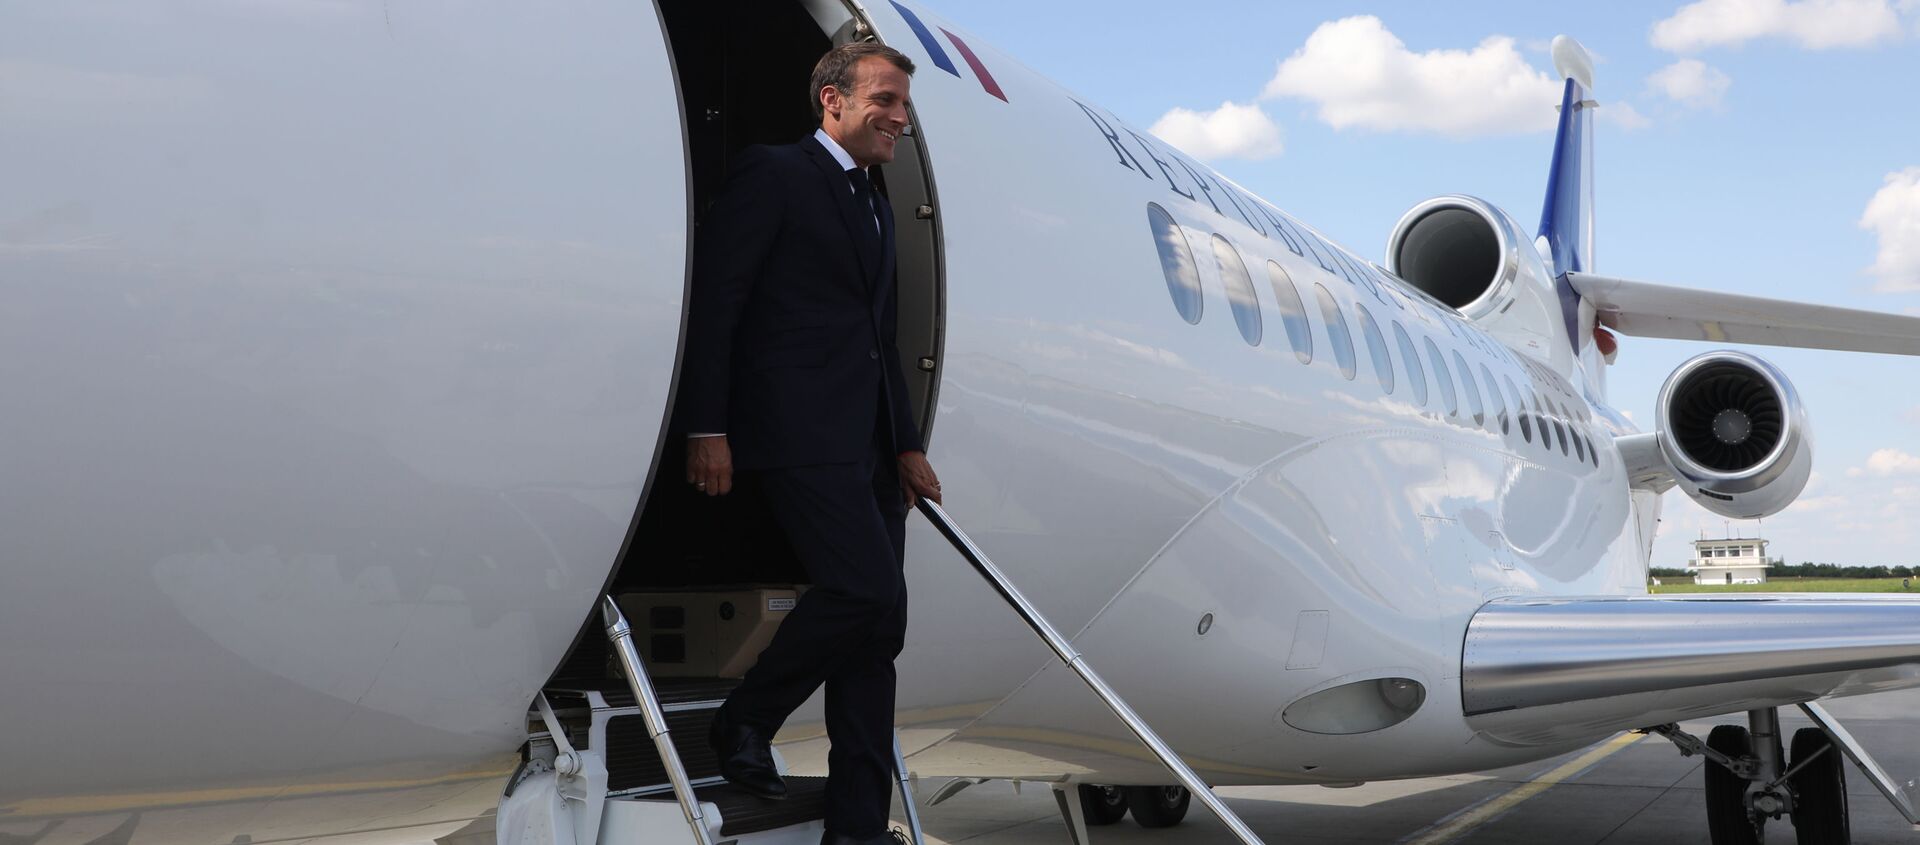 French President Emmanuel Macron leaves the aircraft upon arrival at the airport of Belgrade on July 15, 2019 for his two-day state visit (Photo by ludovic MARIN / AFP) - Sputnik Afrique, 1920, 05.12.2019